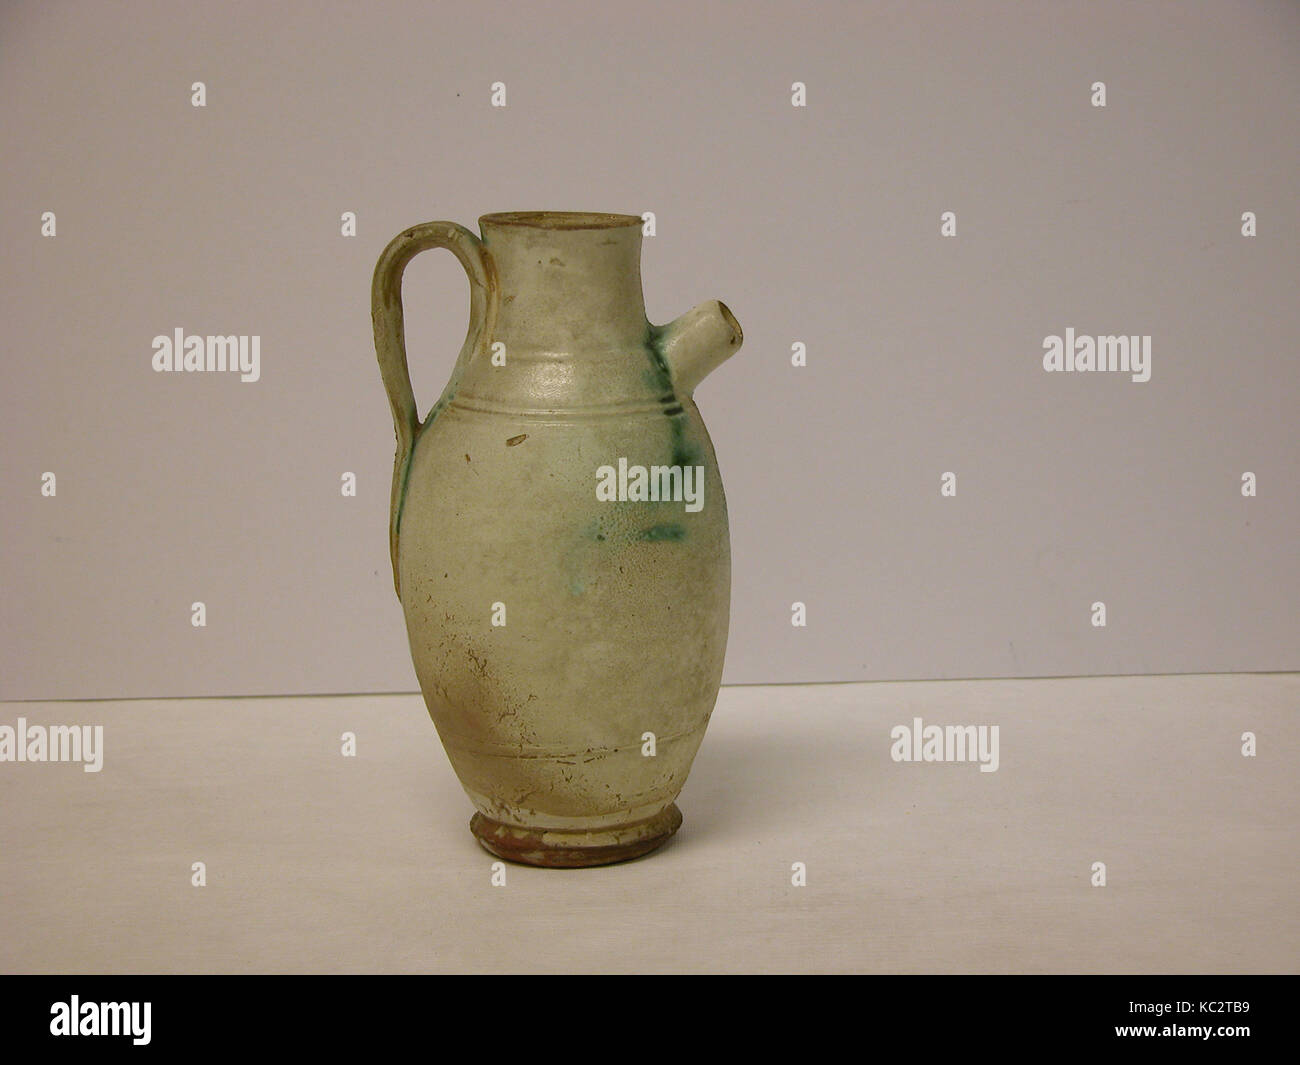 Jug, Northern Song dynasty (960–1127), China, Pottery, H. 7 in. (17.8 cm), Ceramics Stock Photo